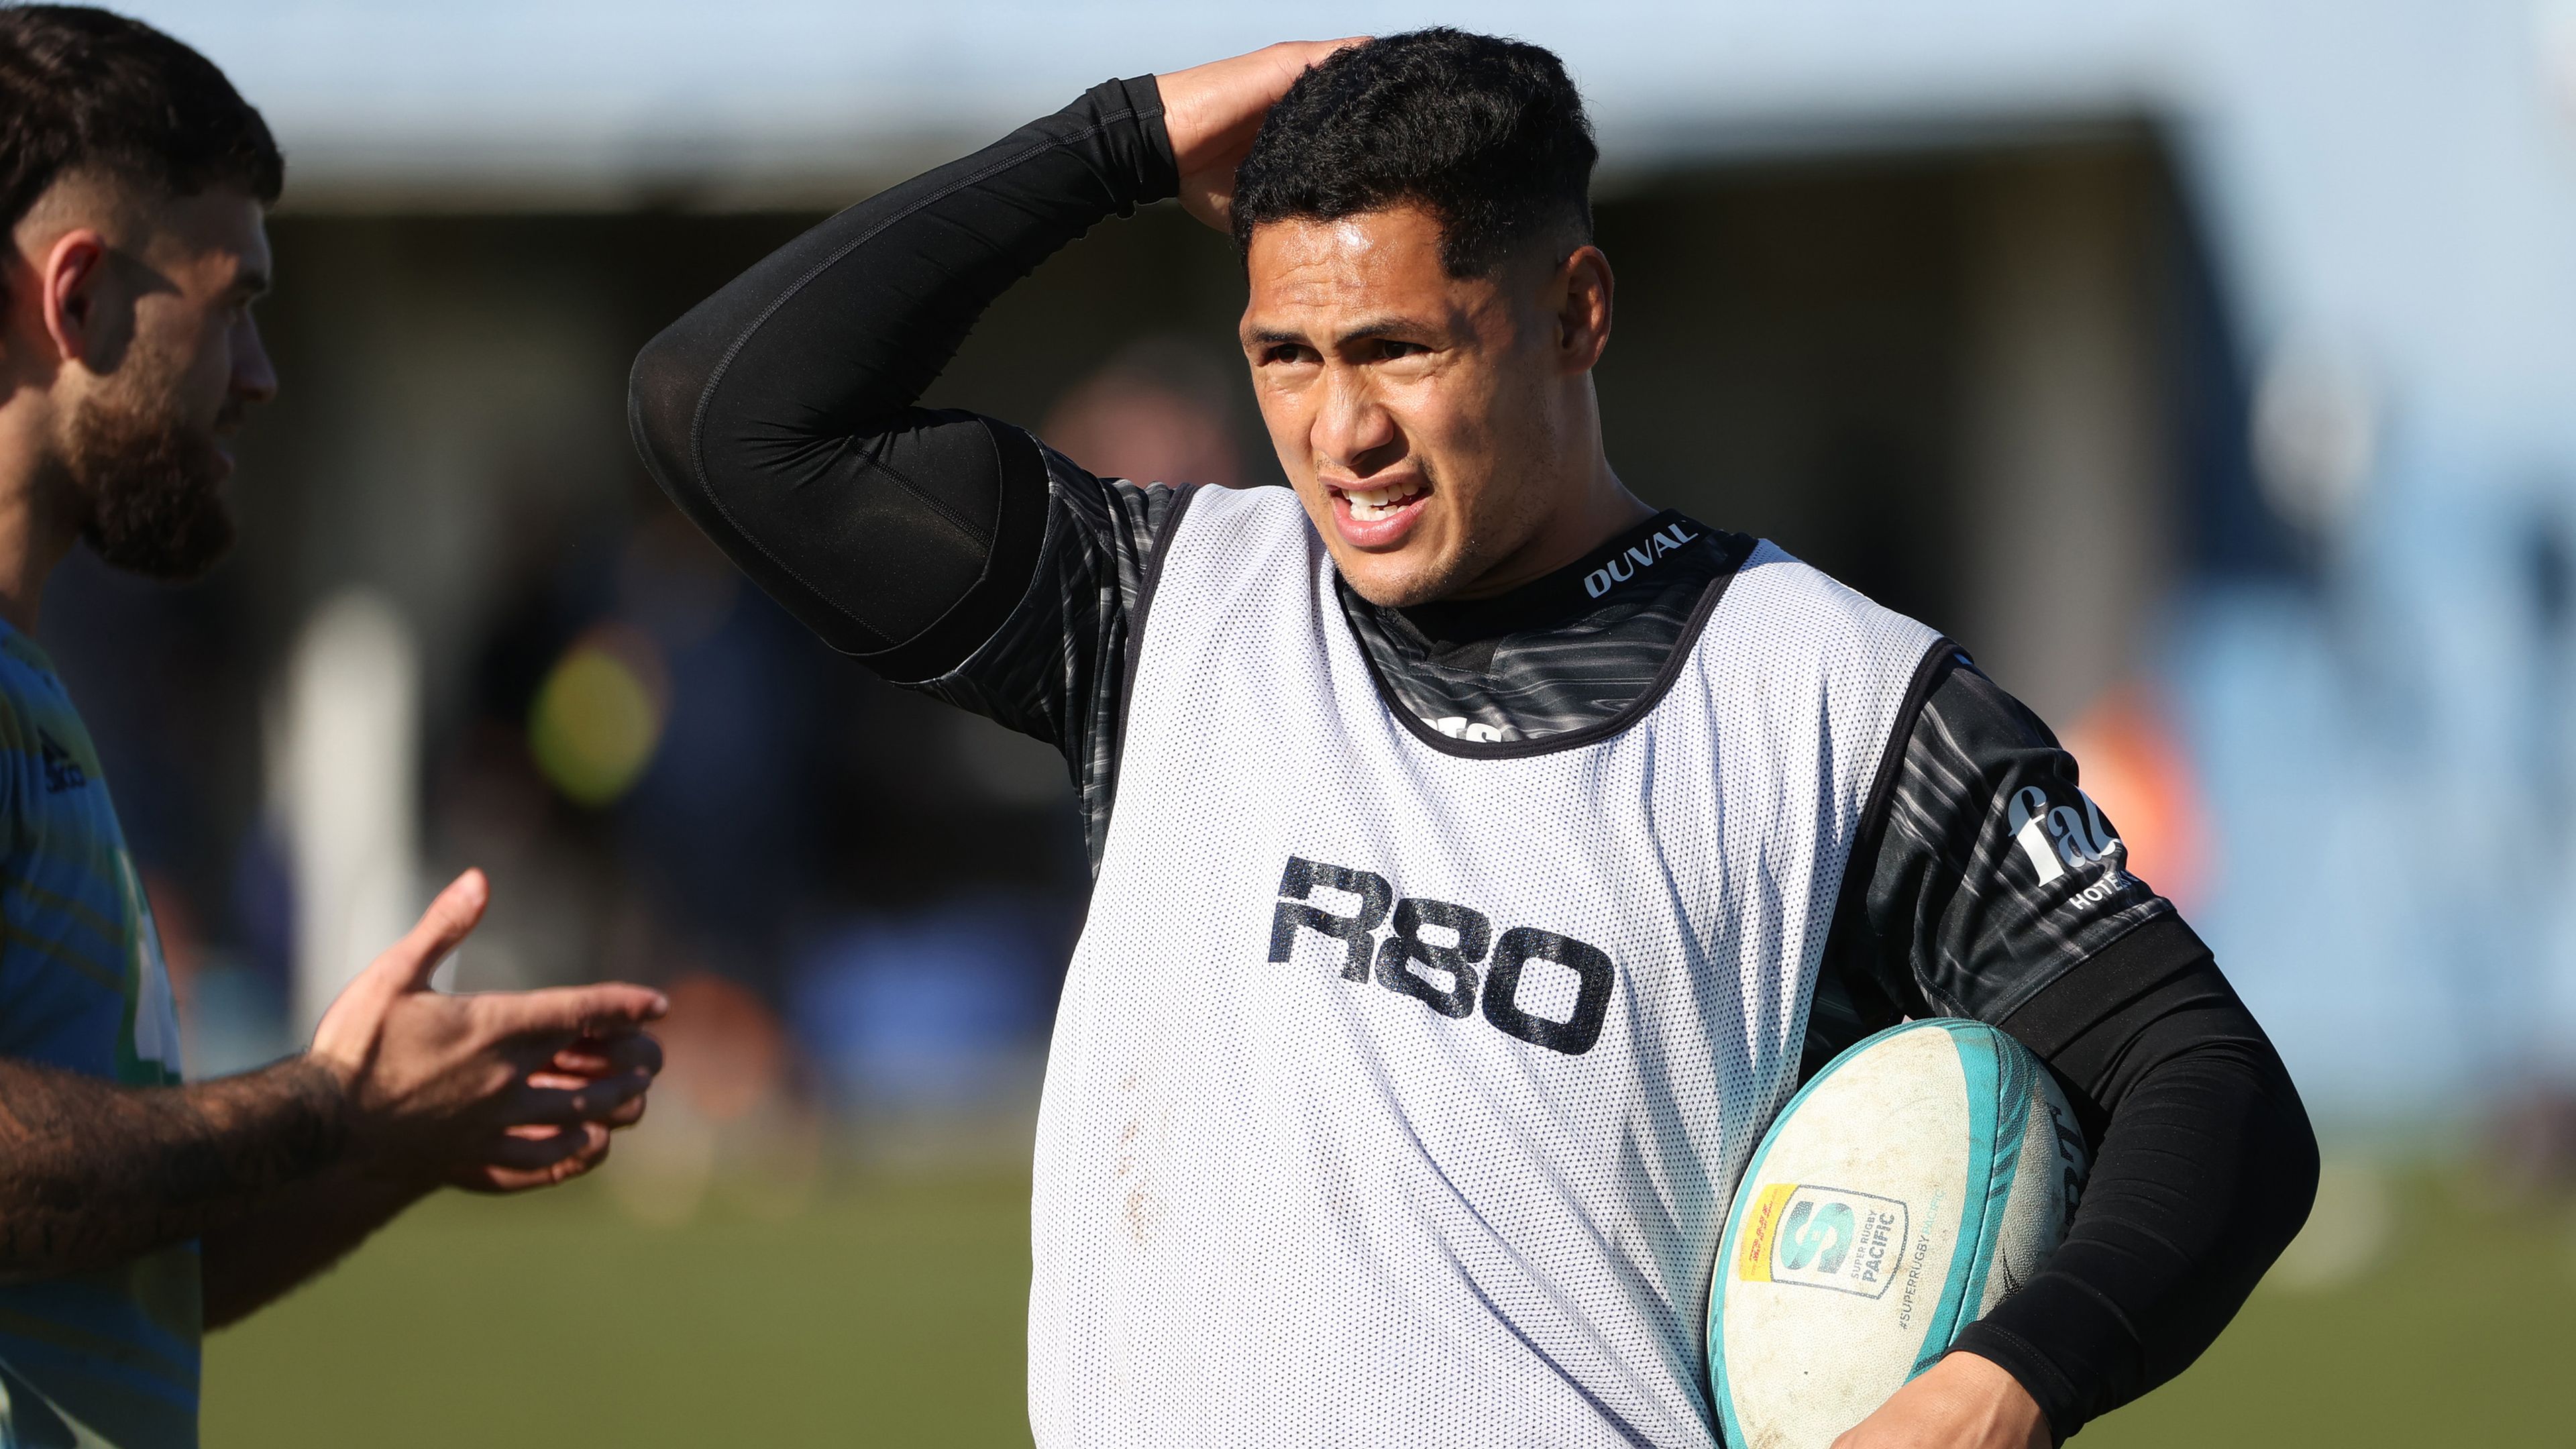 Manly coach ends prospect of Roger Tuivasa-Sheck joining Sea Eagles after Tom Trbojevic blow